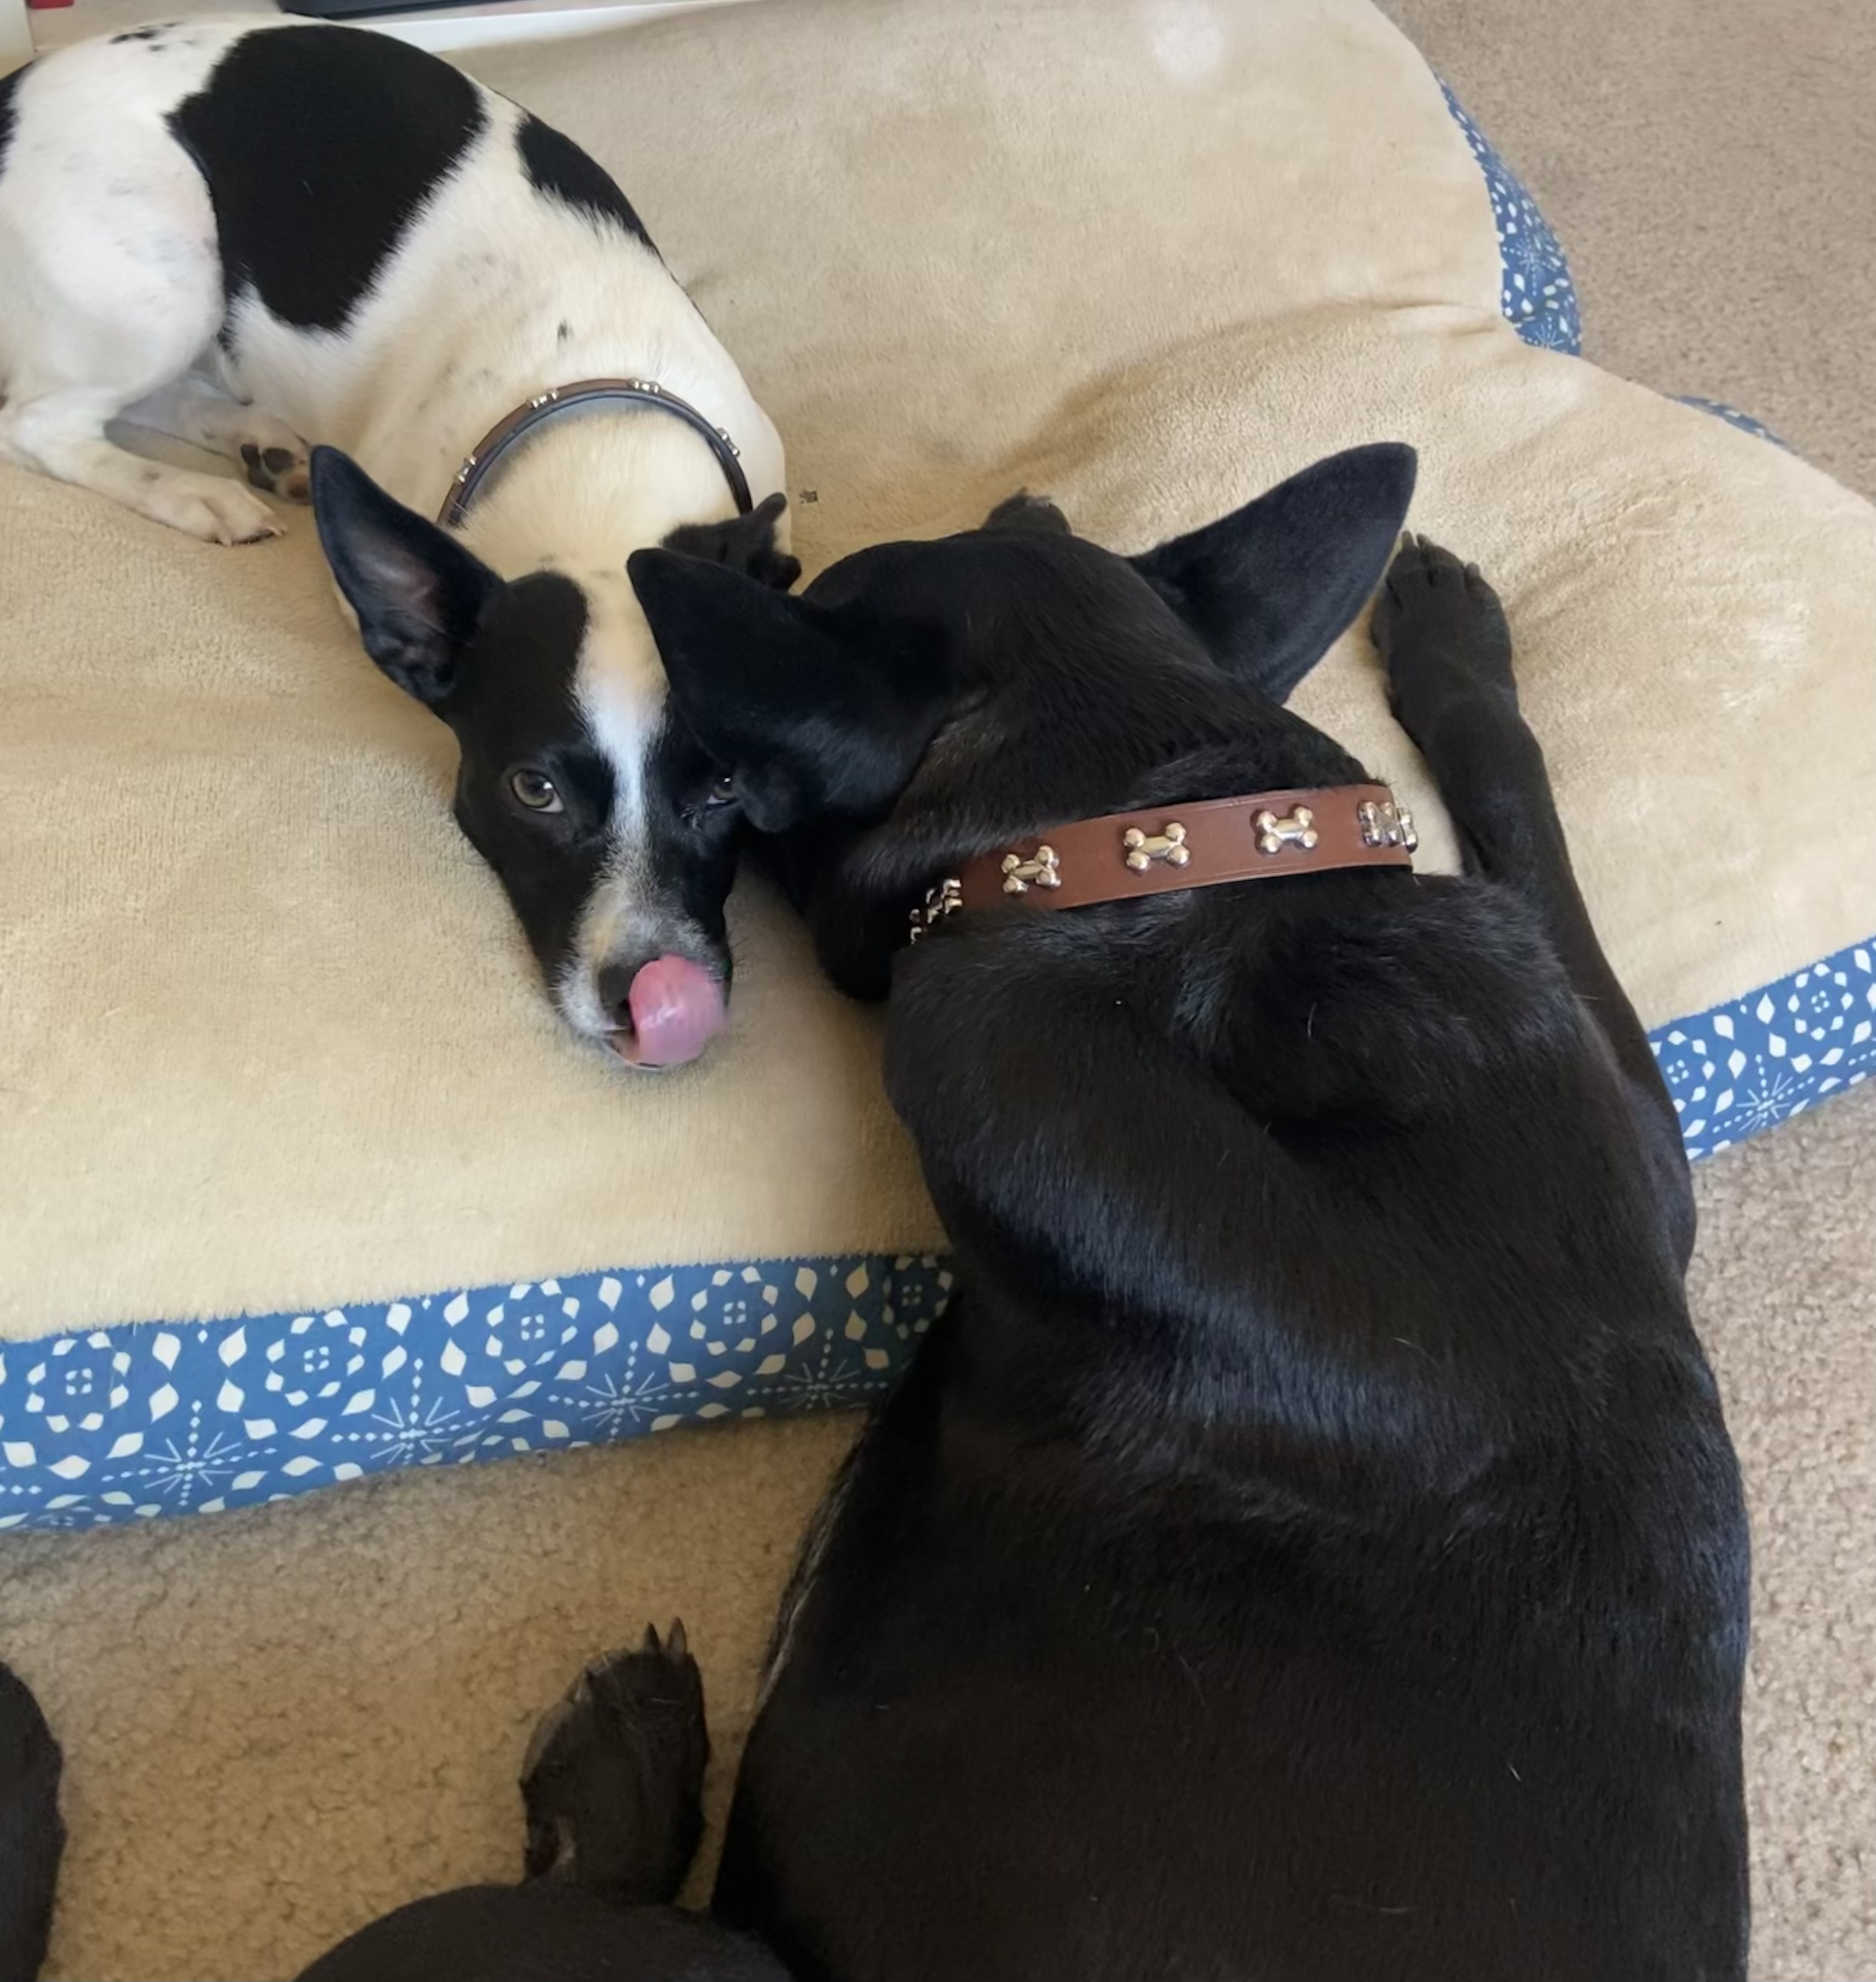 Two dogs lying next to one another, one dog with tongue out the other lying with his back to the camera